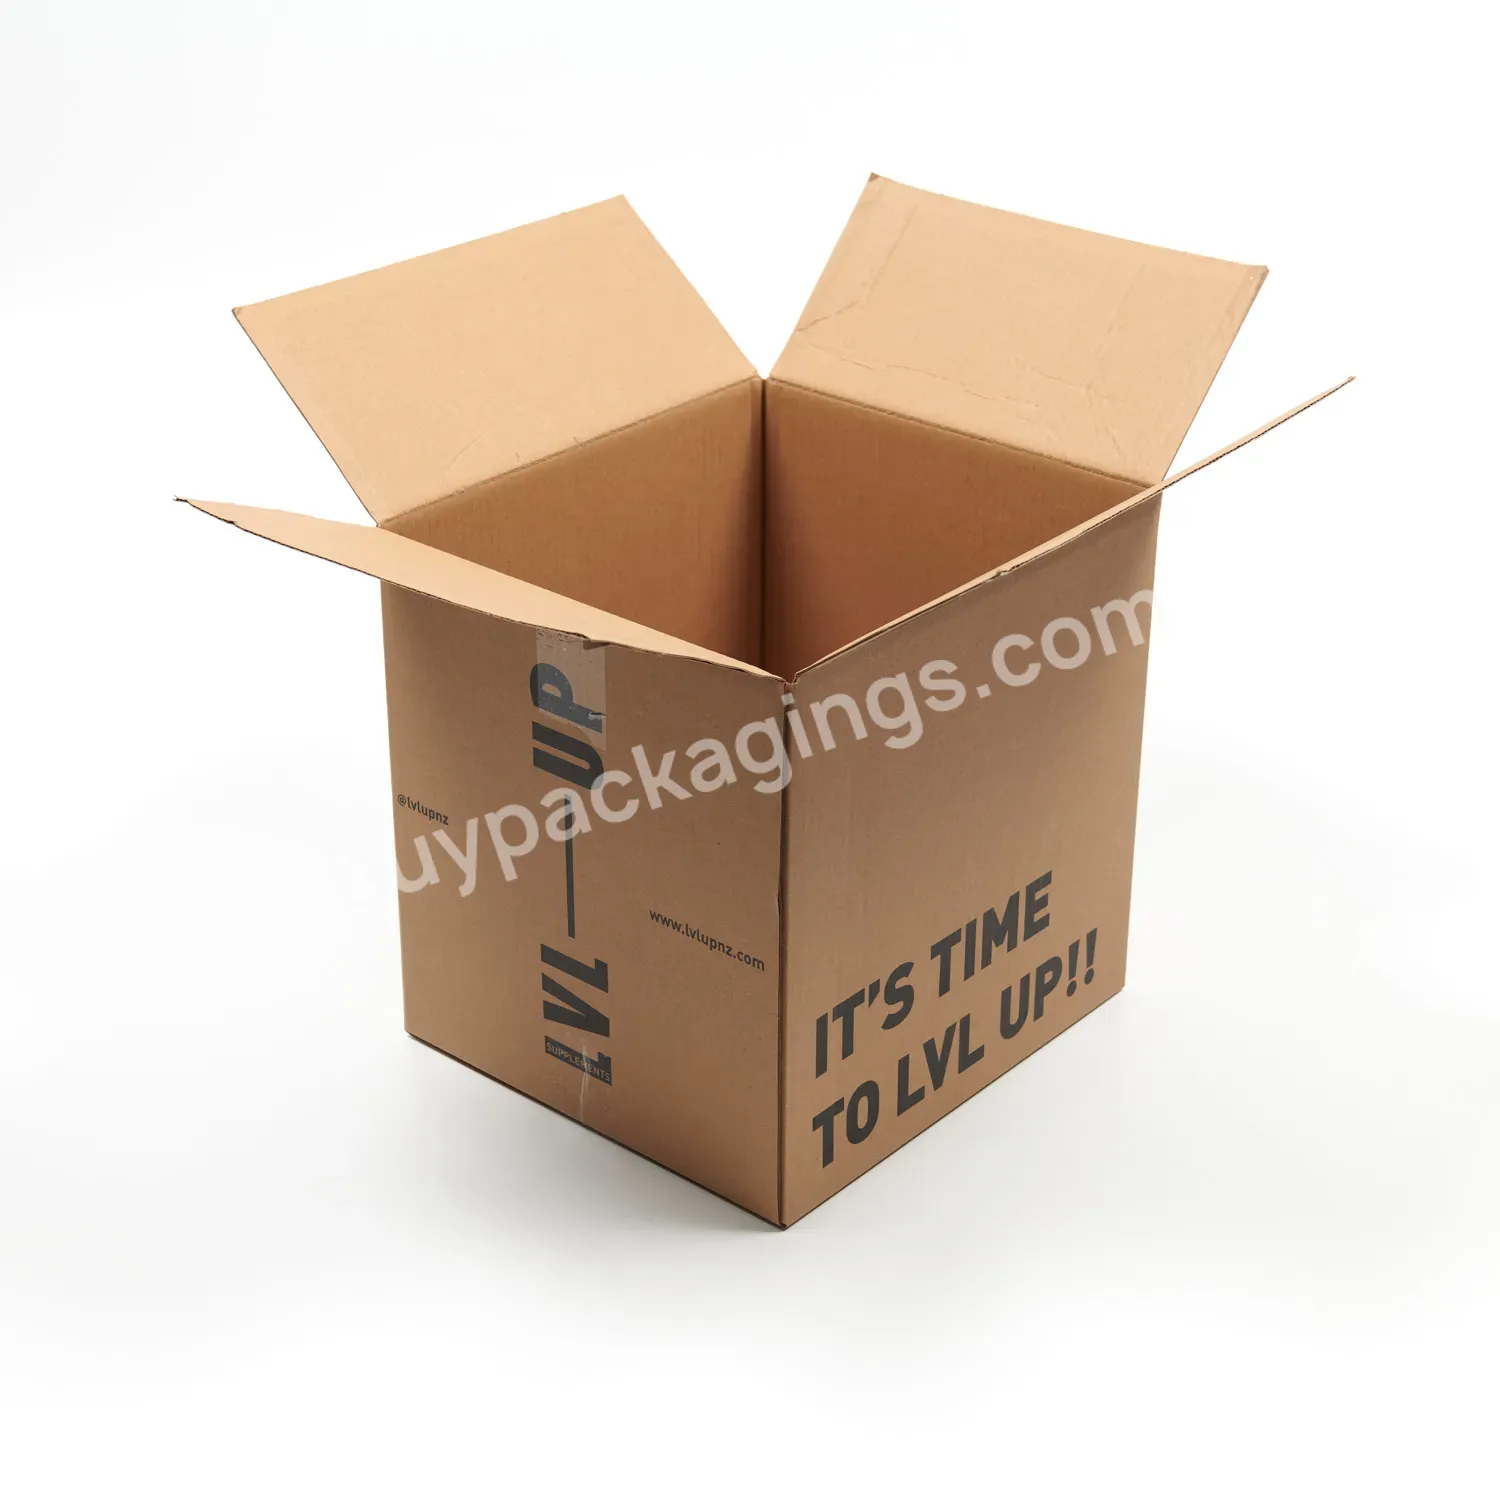 Factory Brown Regular Shipping Box Kraft Corrugated Paper Box For Express Delivery For Small Business Stores